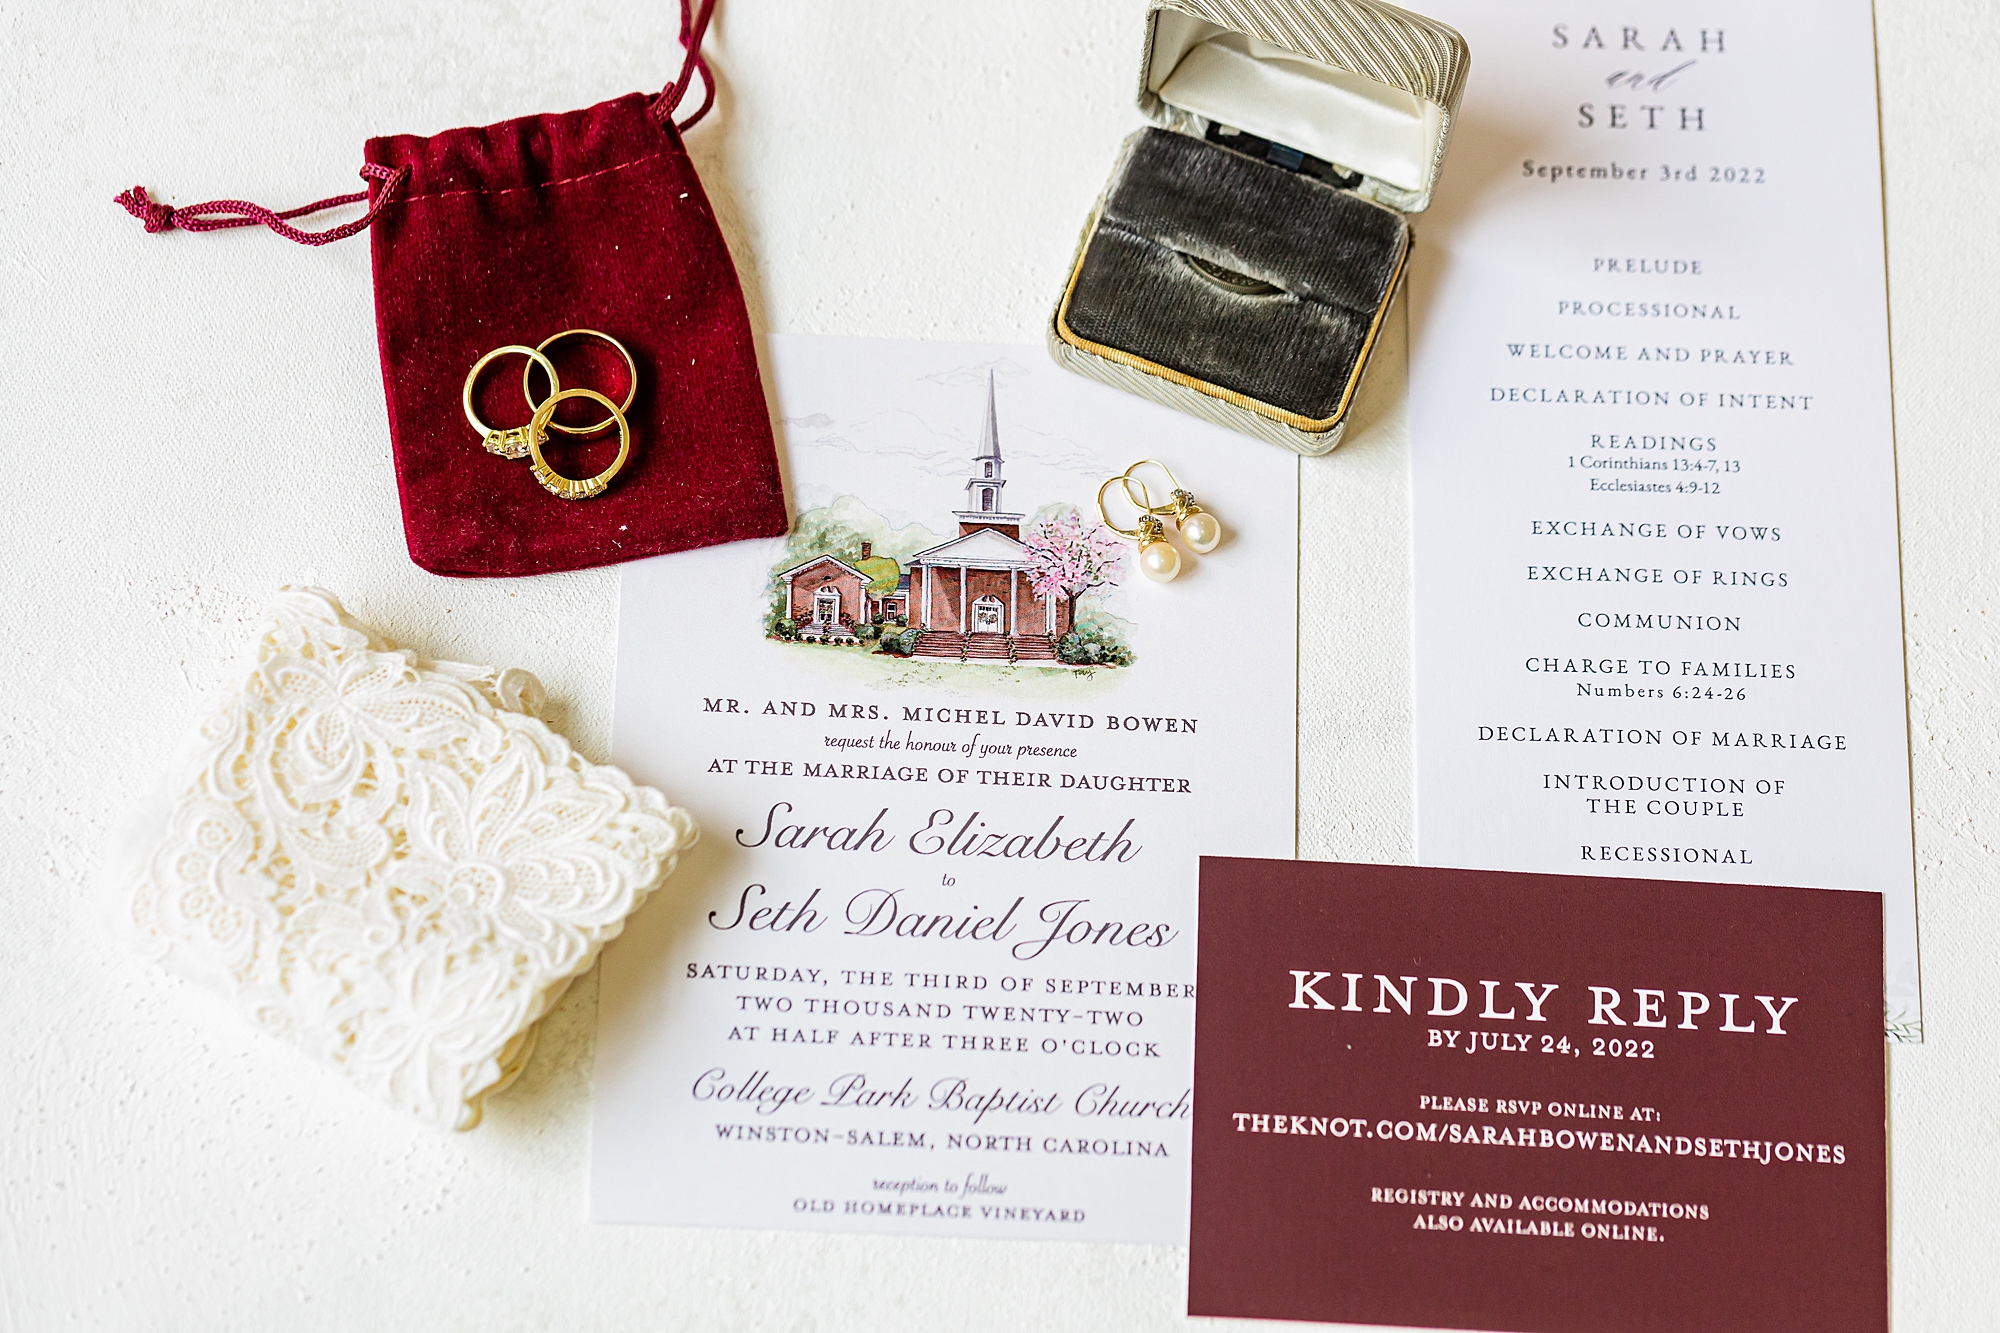 fall wedding details with invitation featuring College Park Baptist Church